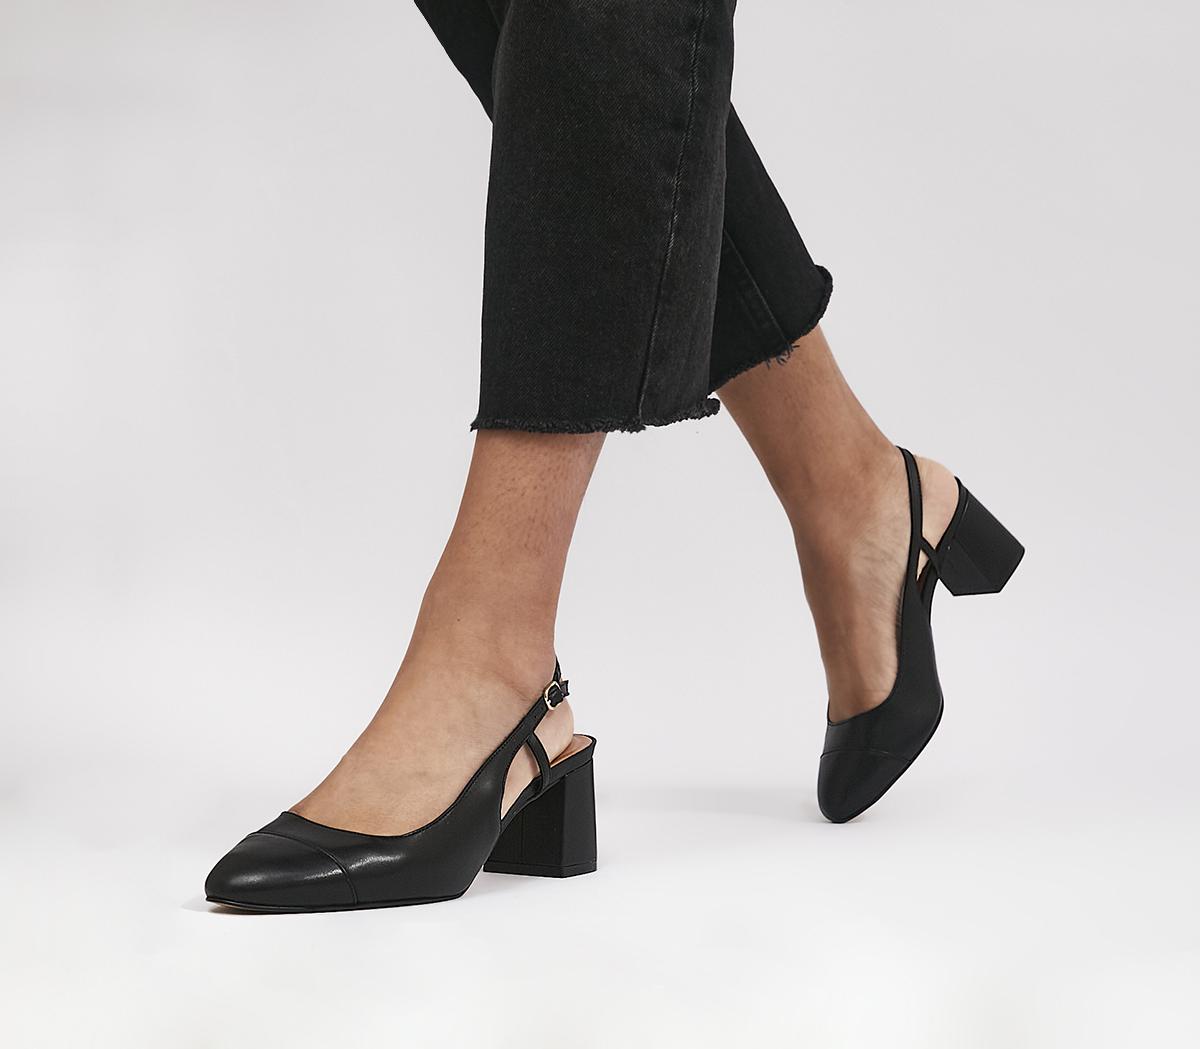 Slingback Heels & Shoes For Women – Sergio Rossi